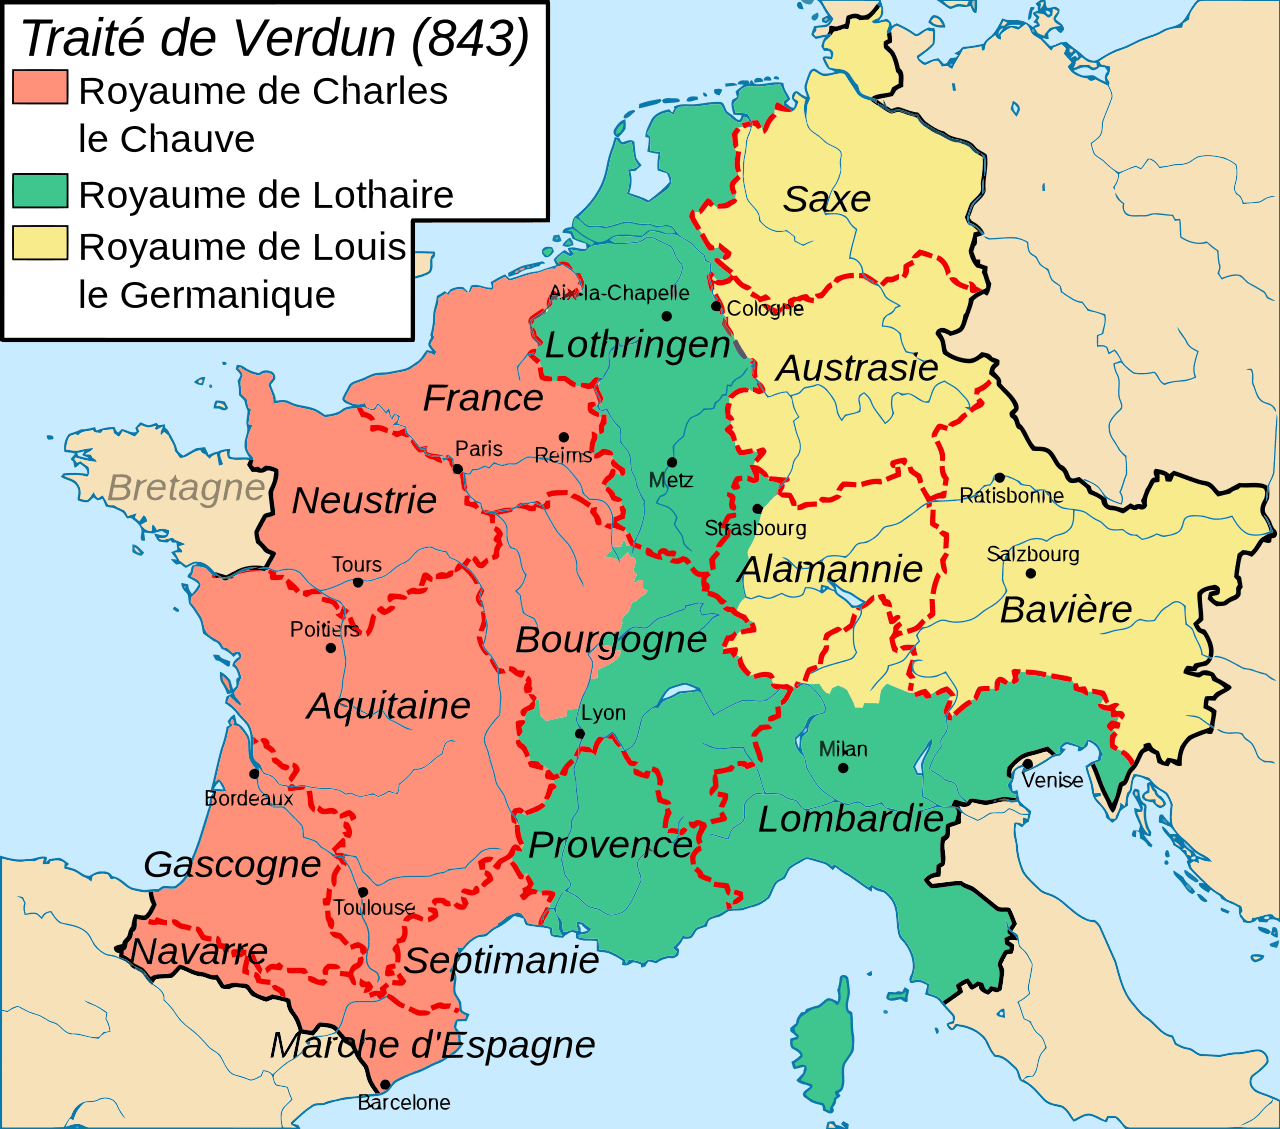 You are currently viewing Partition de l’Empire carolingien (843)